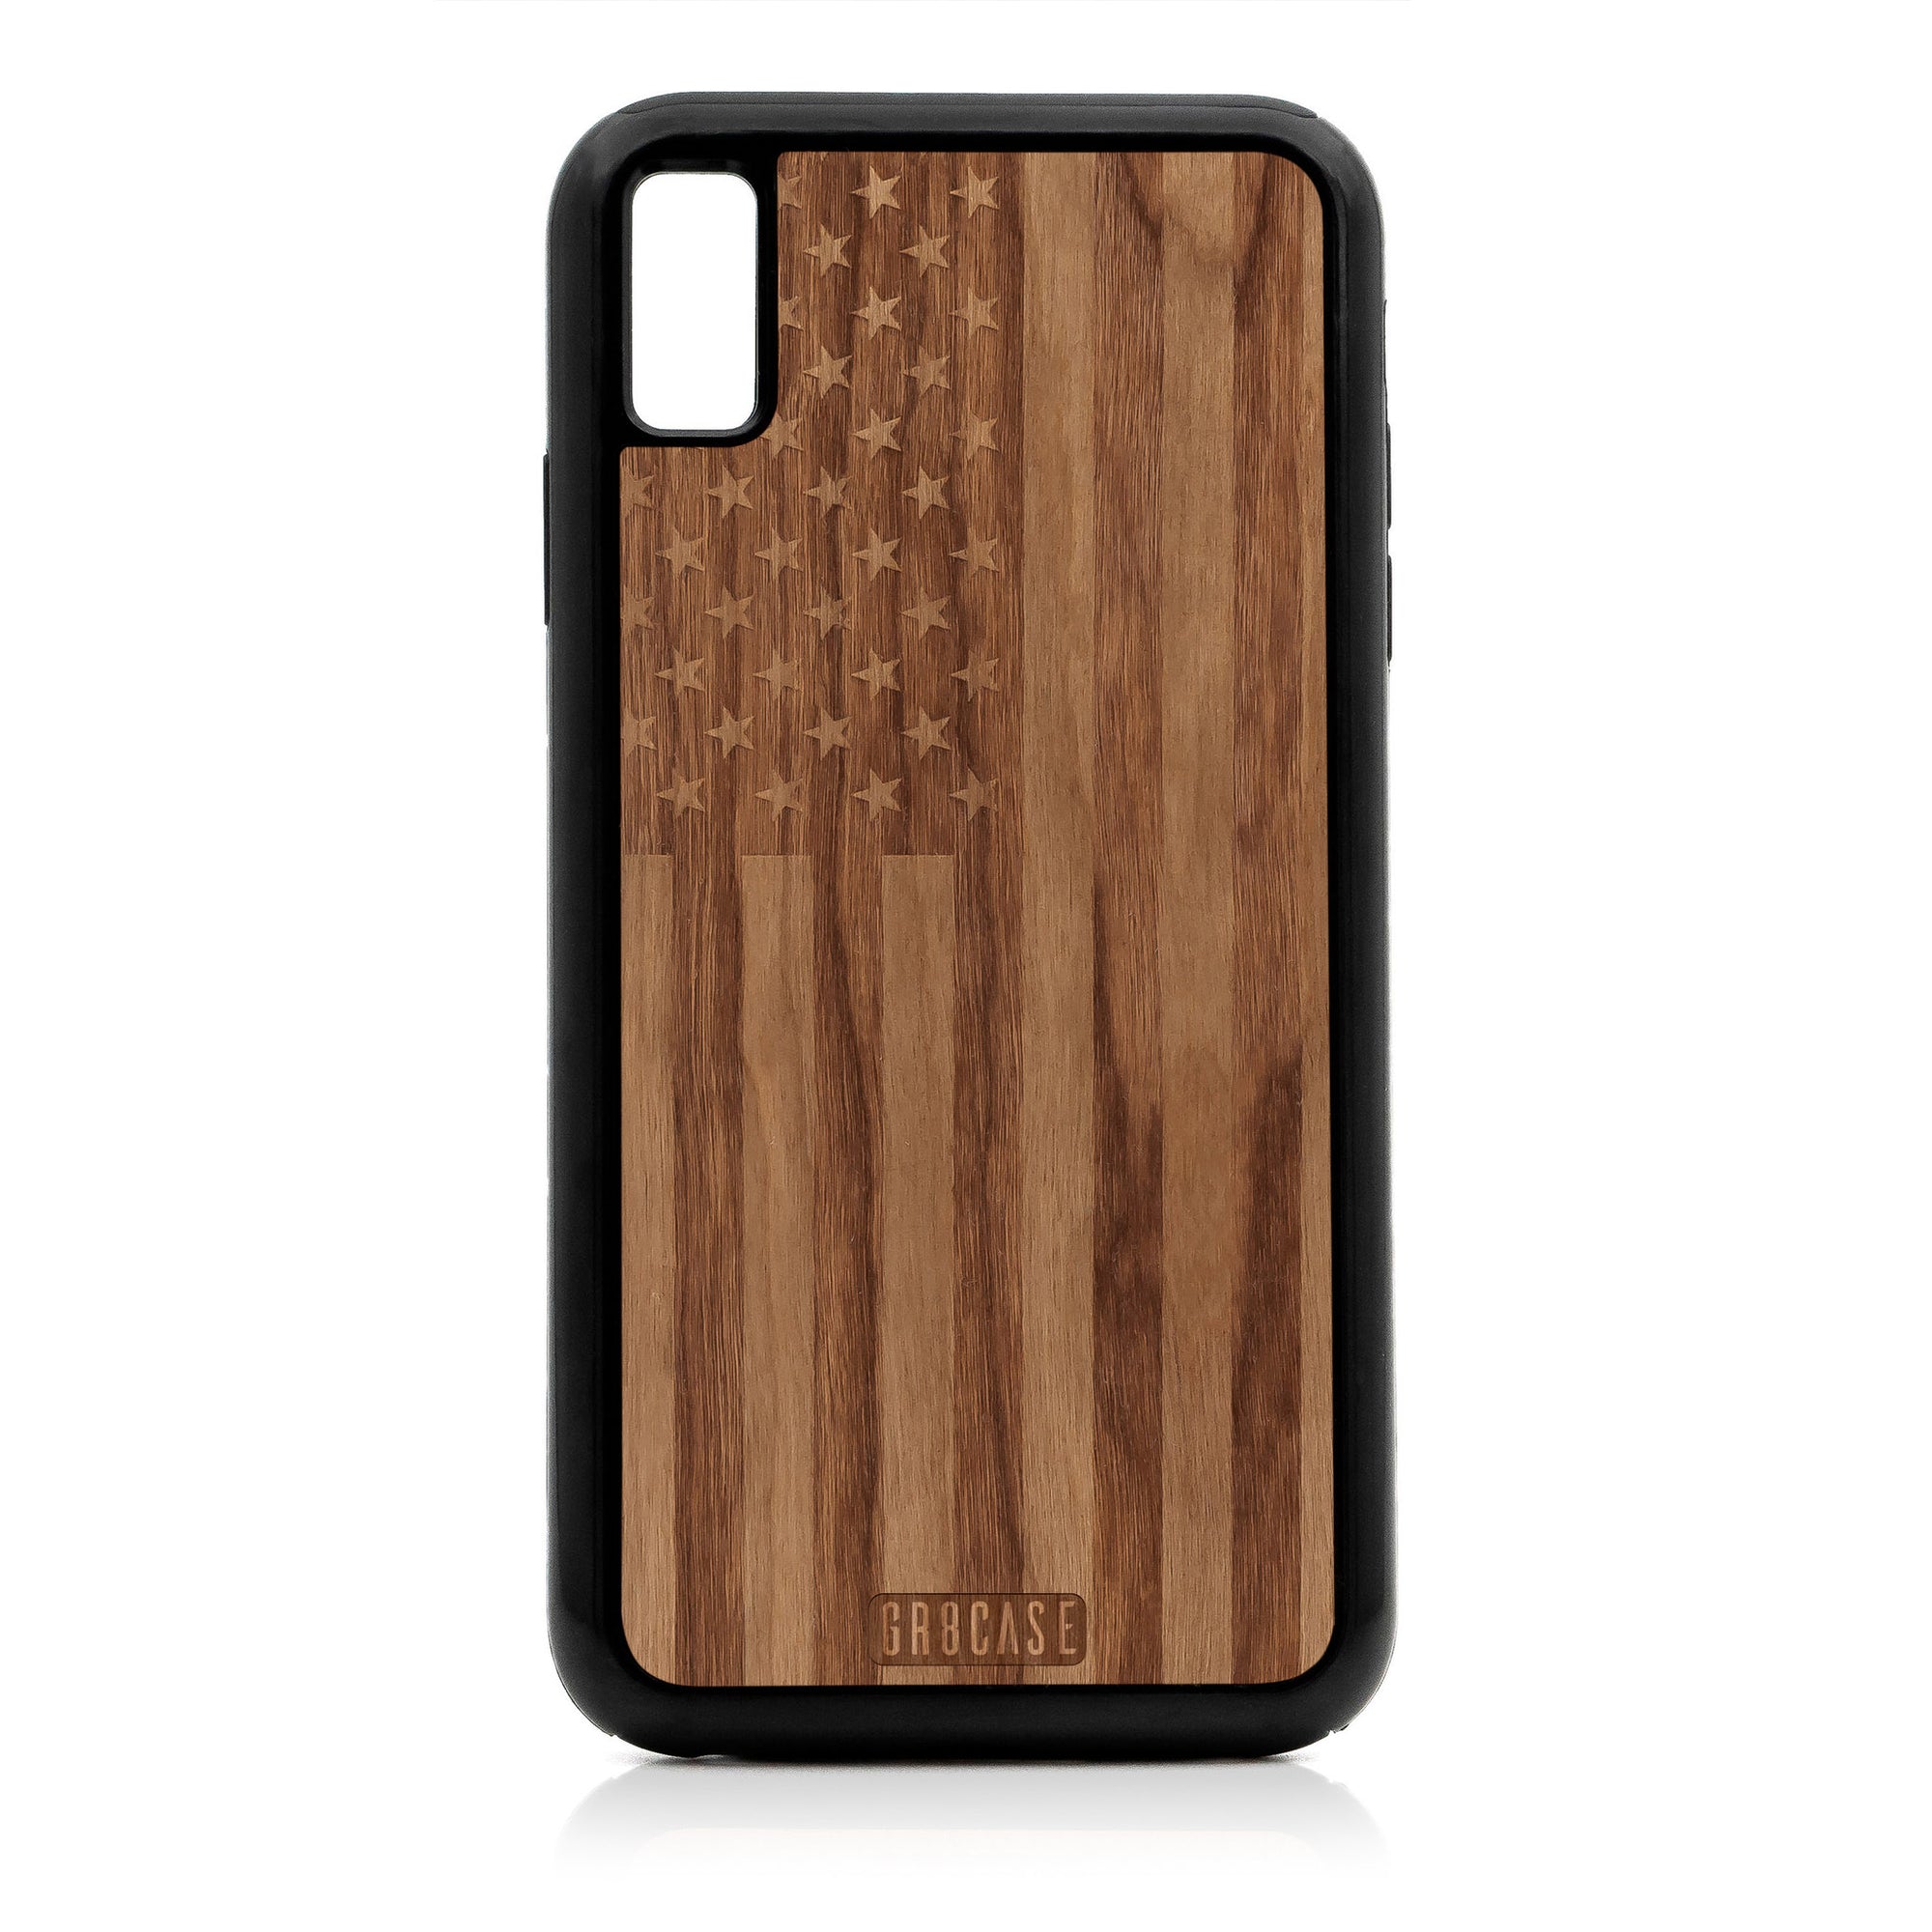 USA Flag Design Wood Case For iPhone XS Max